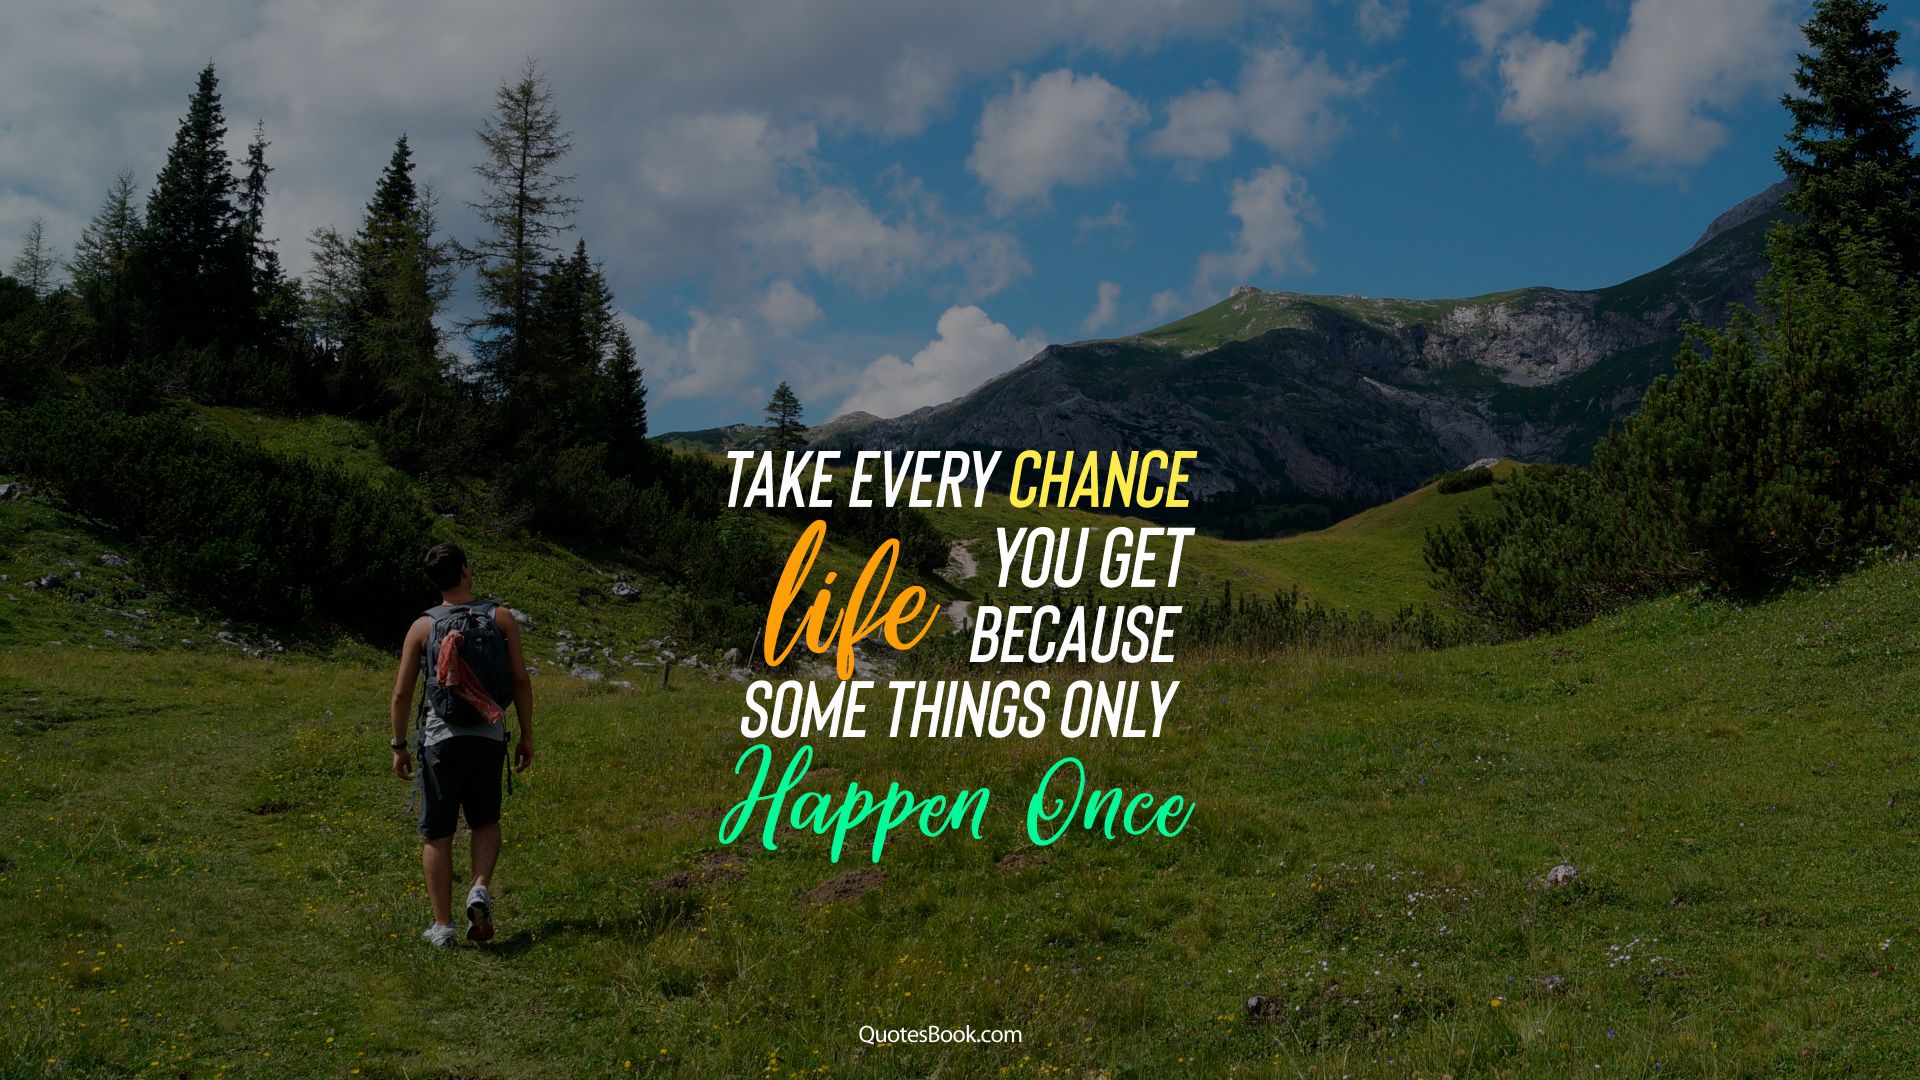 Take every chance you get life because some things only happen once 